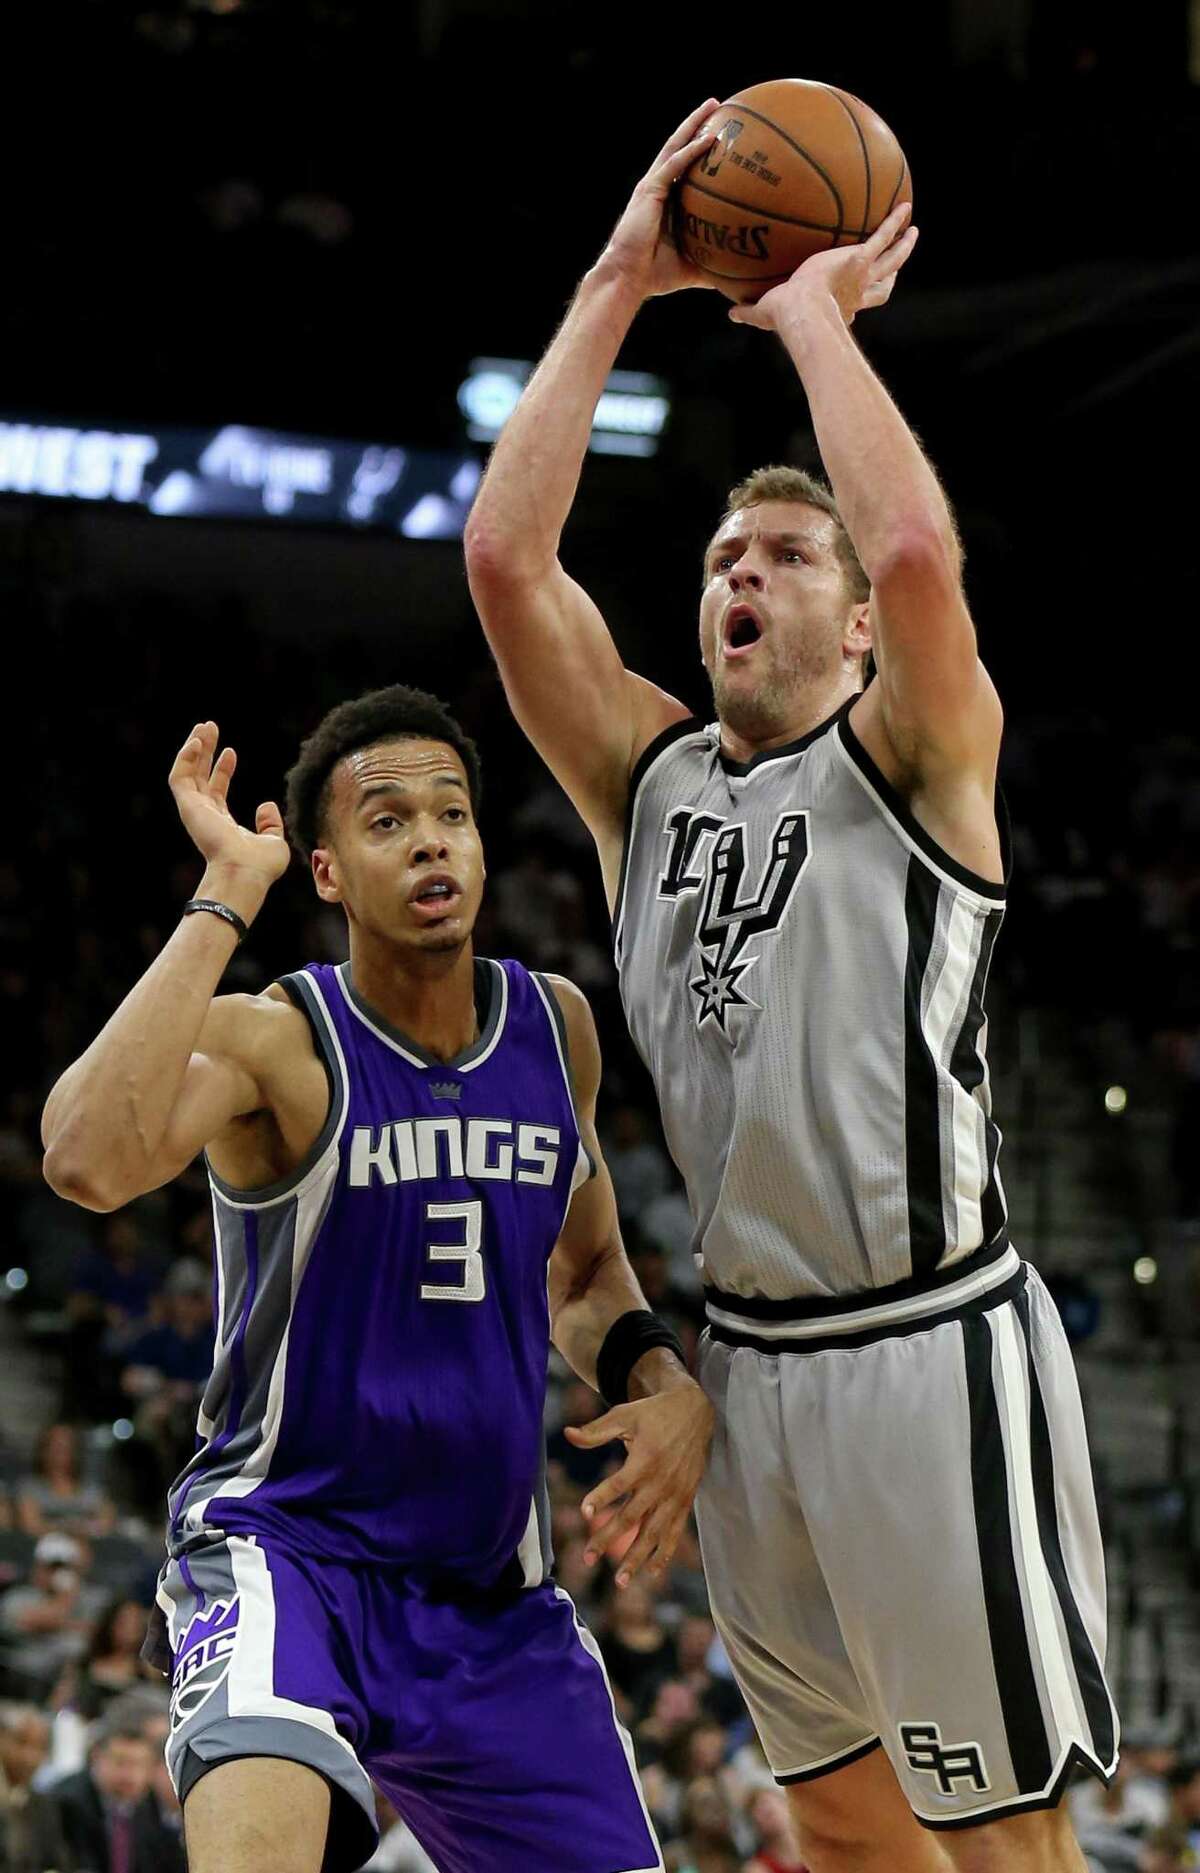 Spurs’ David Lee shoots on the Sacramento Kings’ Skal Labissiere during first half action on March 19, 2017 at the AT&T Center.